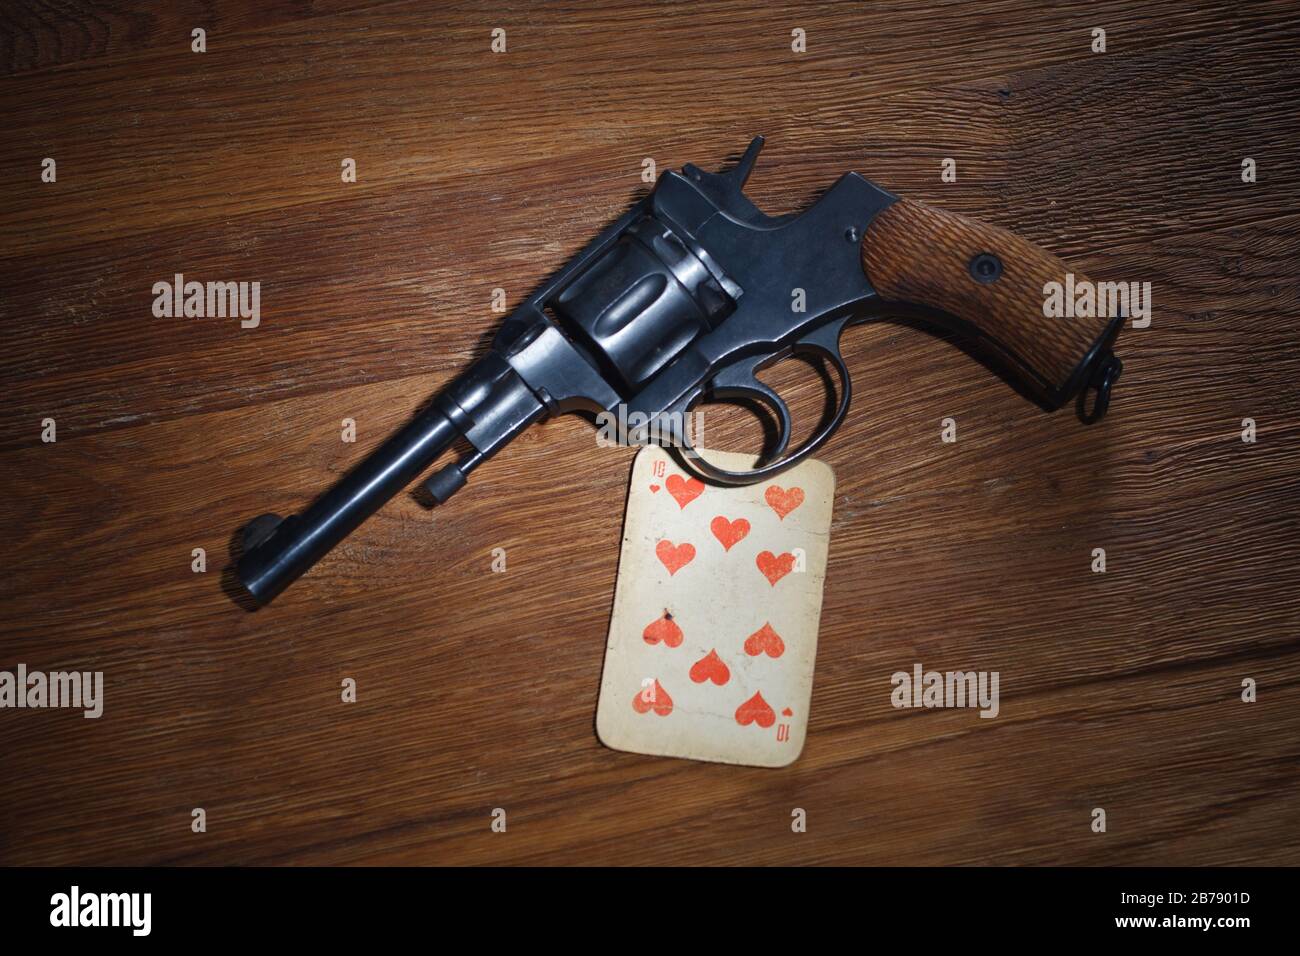 russian roulette - Ten of Hearts plaing card and revolver with one cartridge in drum on wooden table background Stock Photo